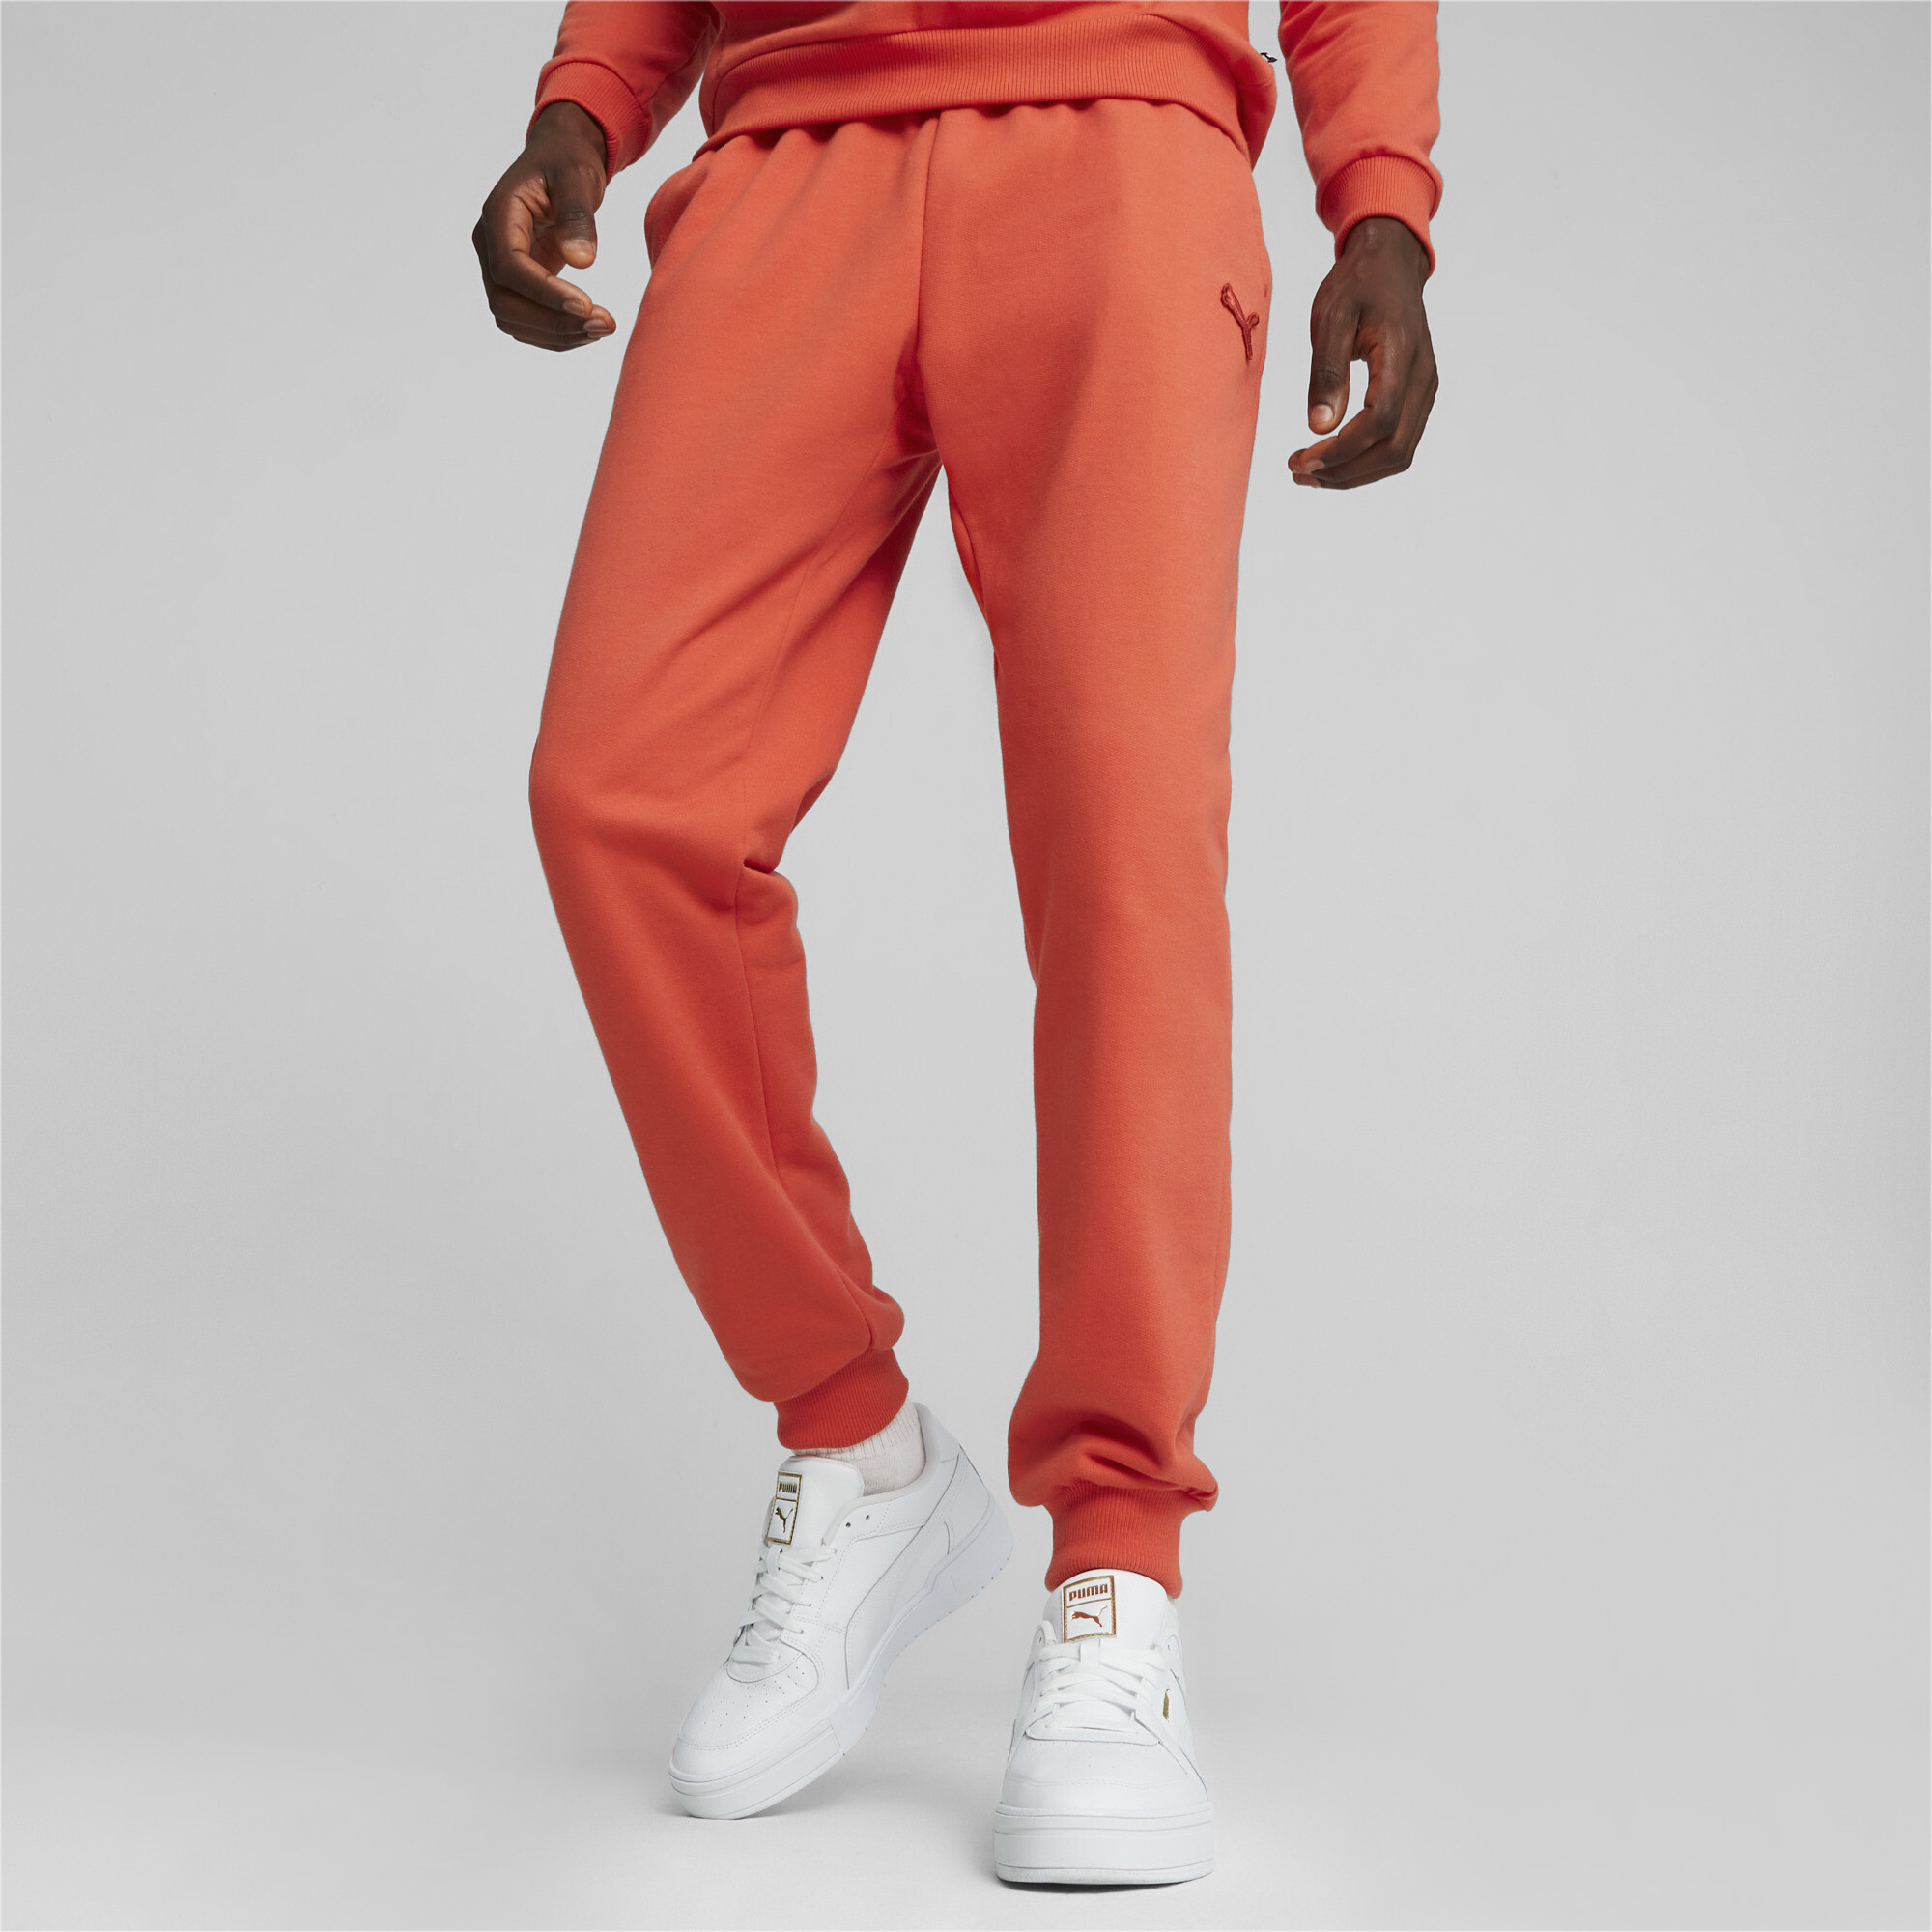 Puma Made In France Track Pants, Orange, Size XL, Clothing